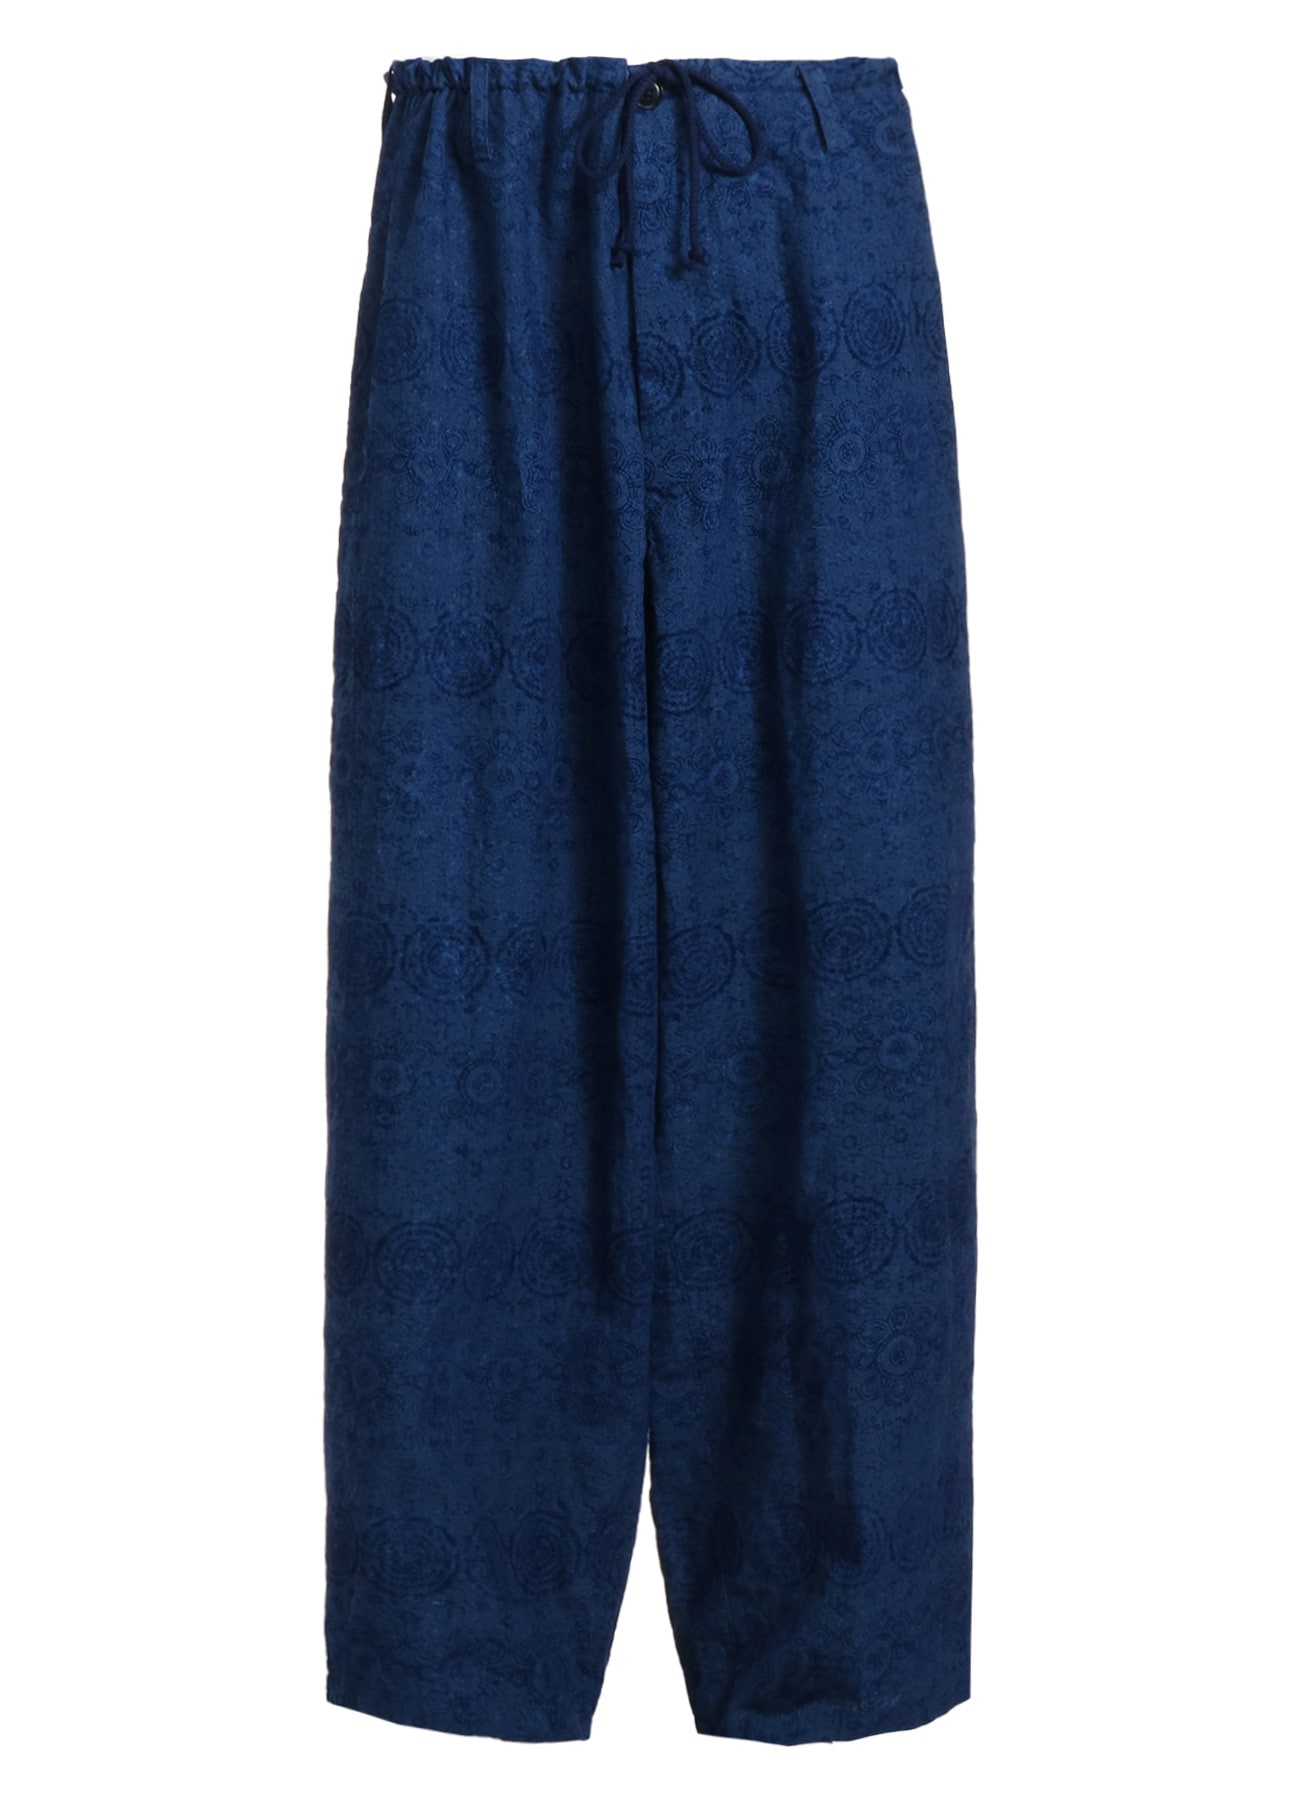 MURAL LACE FADED FLOCKY LINEN CLOTH DRAWSTRING WIDE PANTS(M Blue 